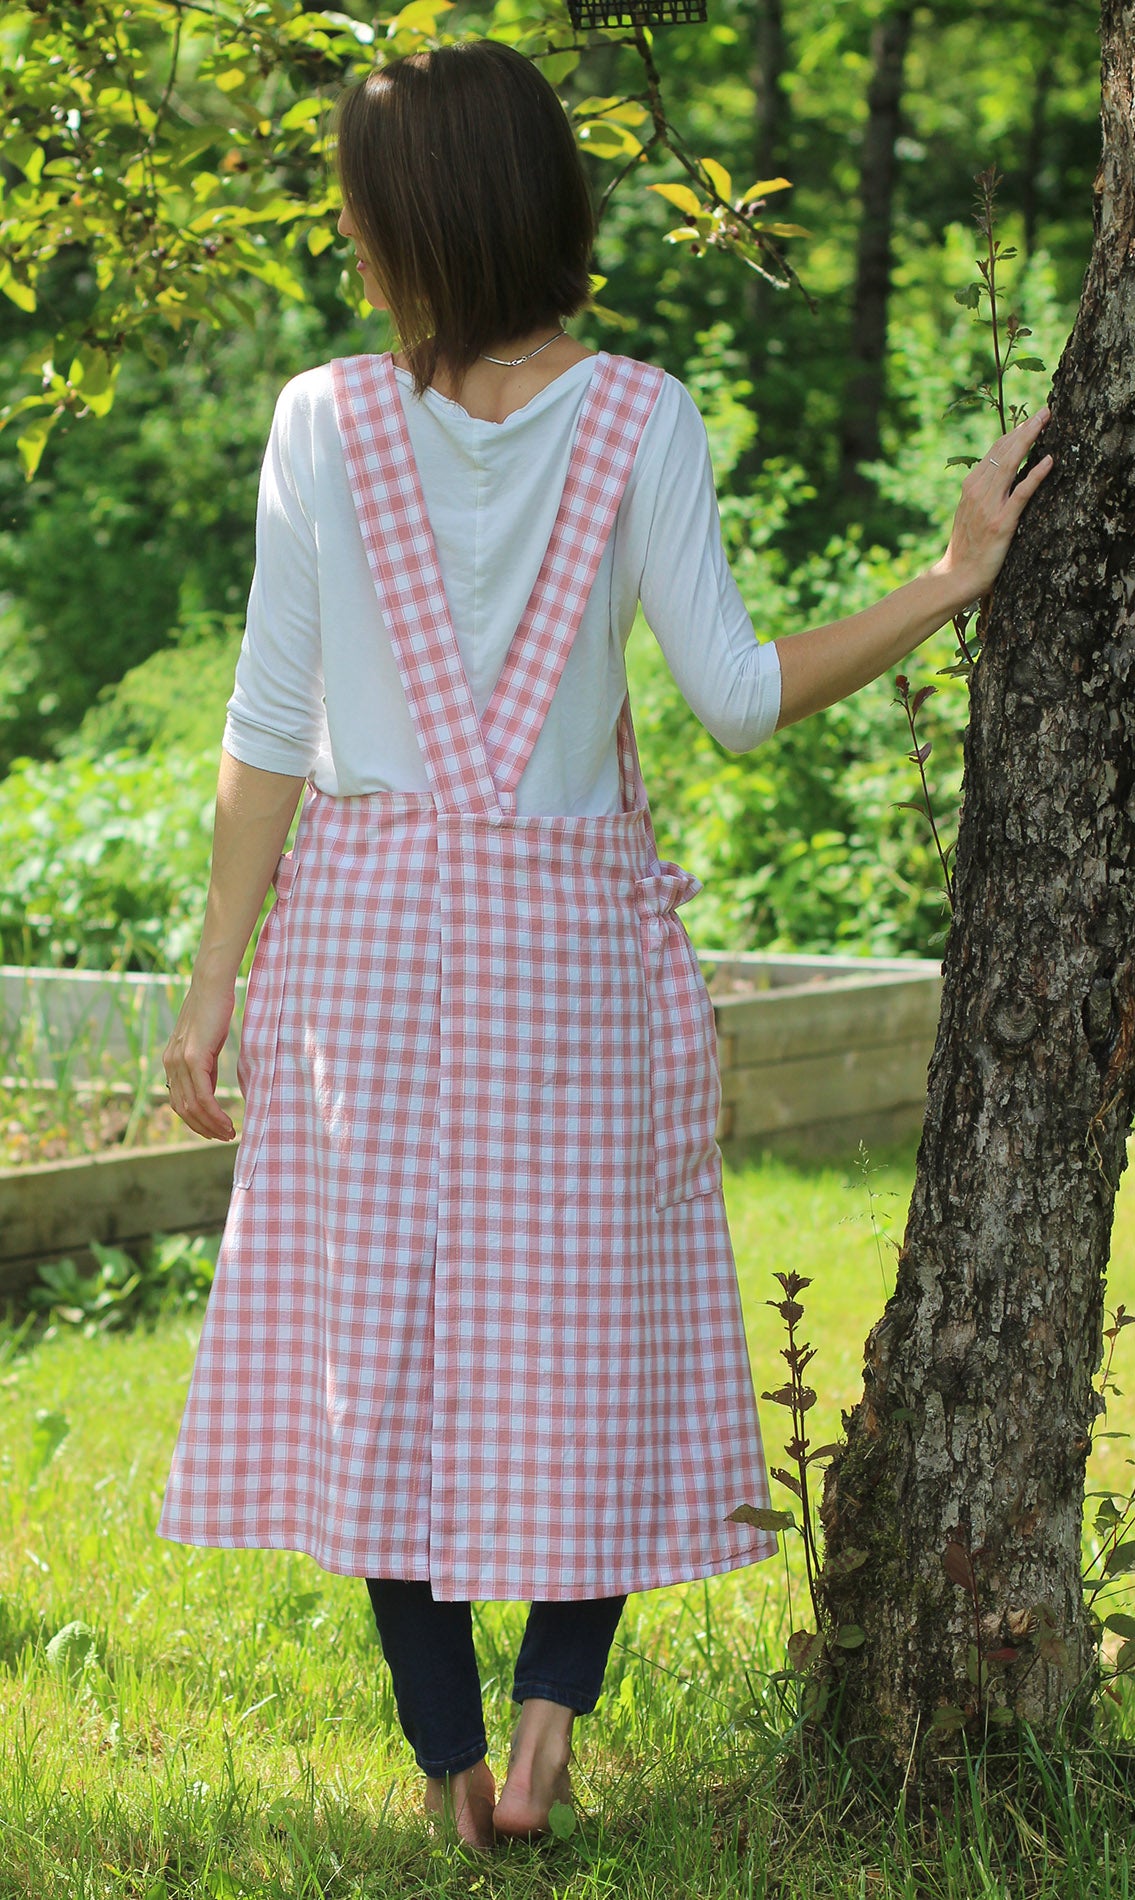 XS-5X No Ties Crossback Apron in 100% Cotton Pink and White Check Homespun - Back View